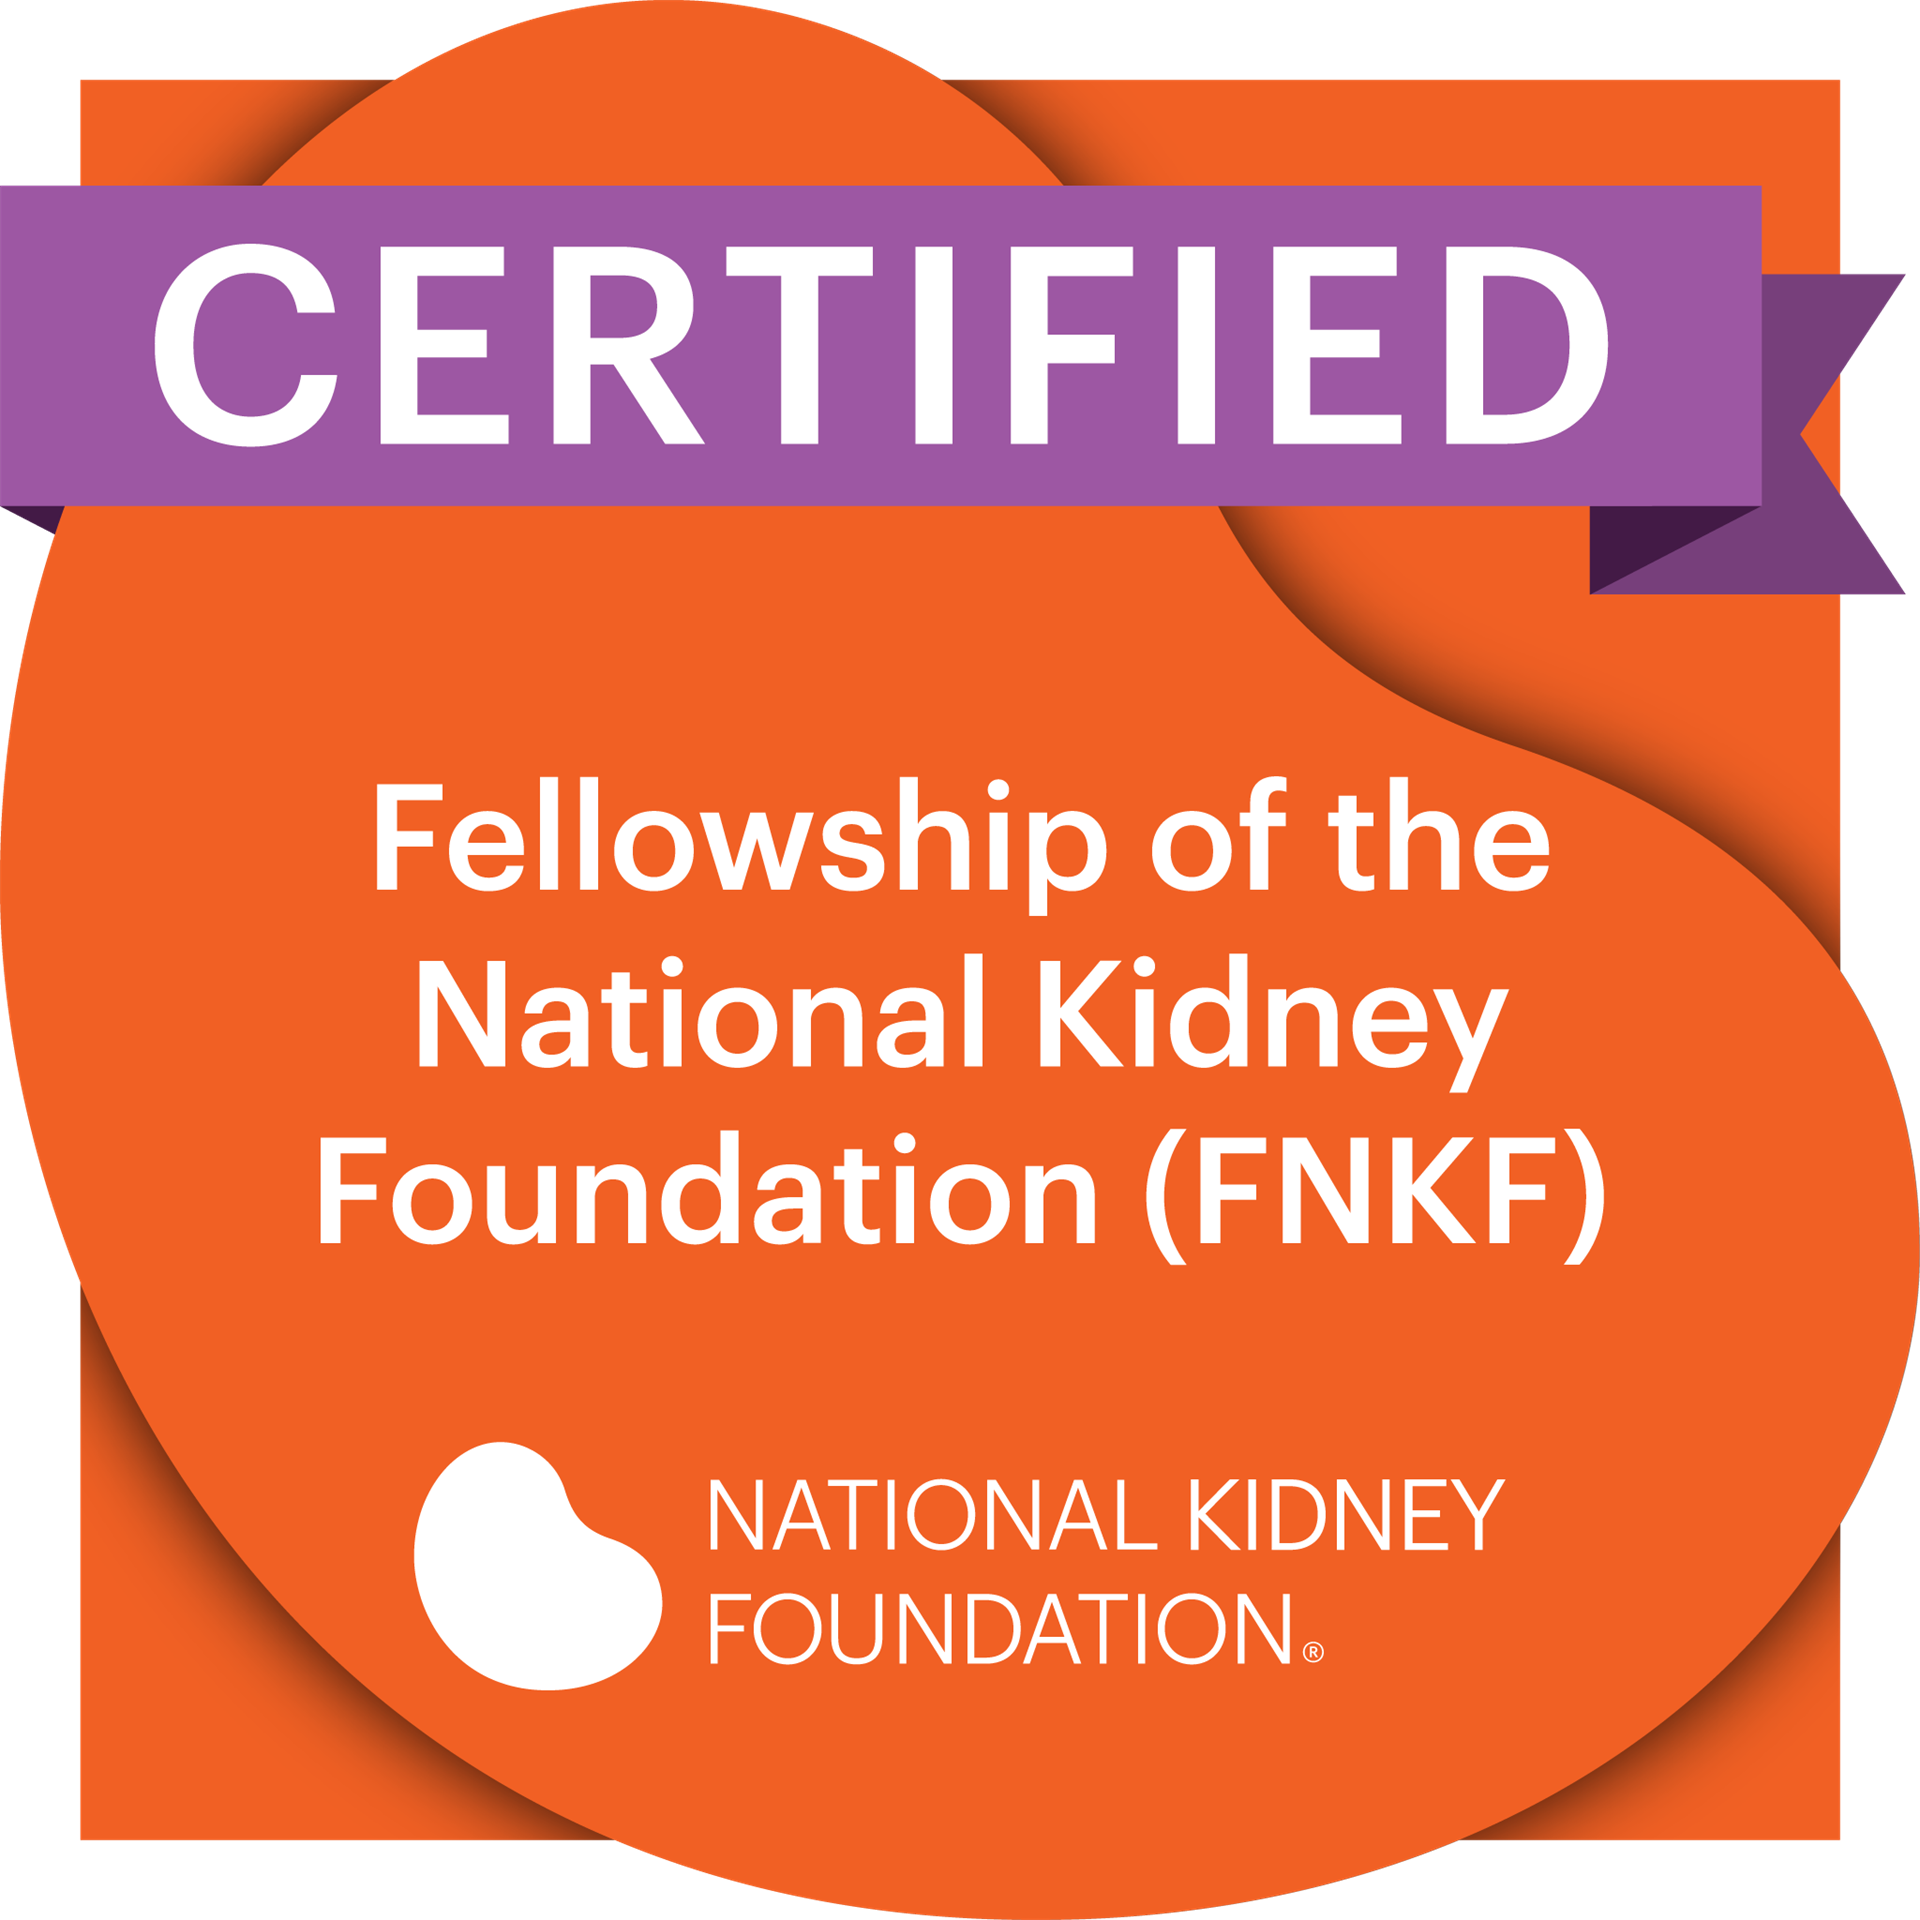 Certified Credly Badge: Fellowship of the National Kidney Foundation (FNKF)